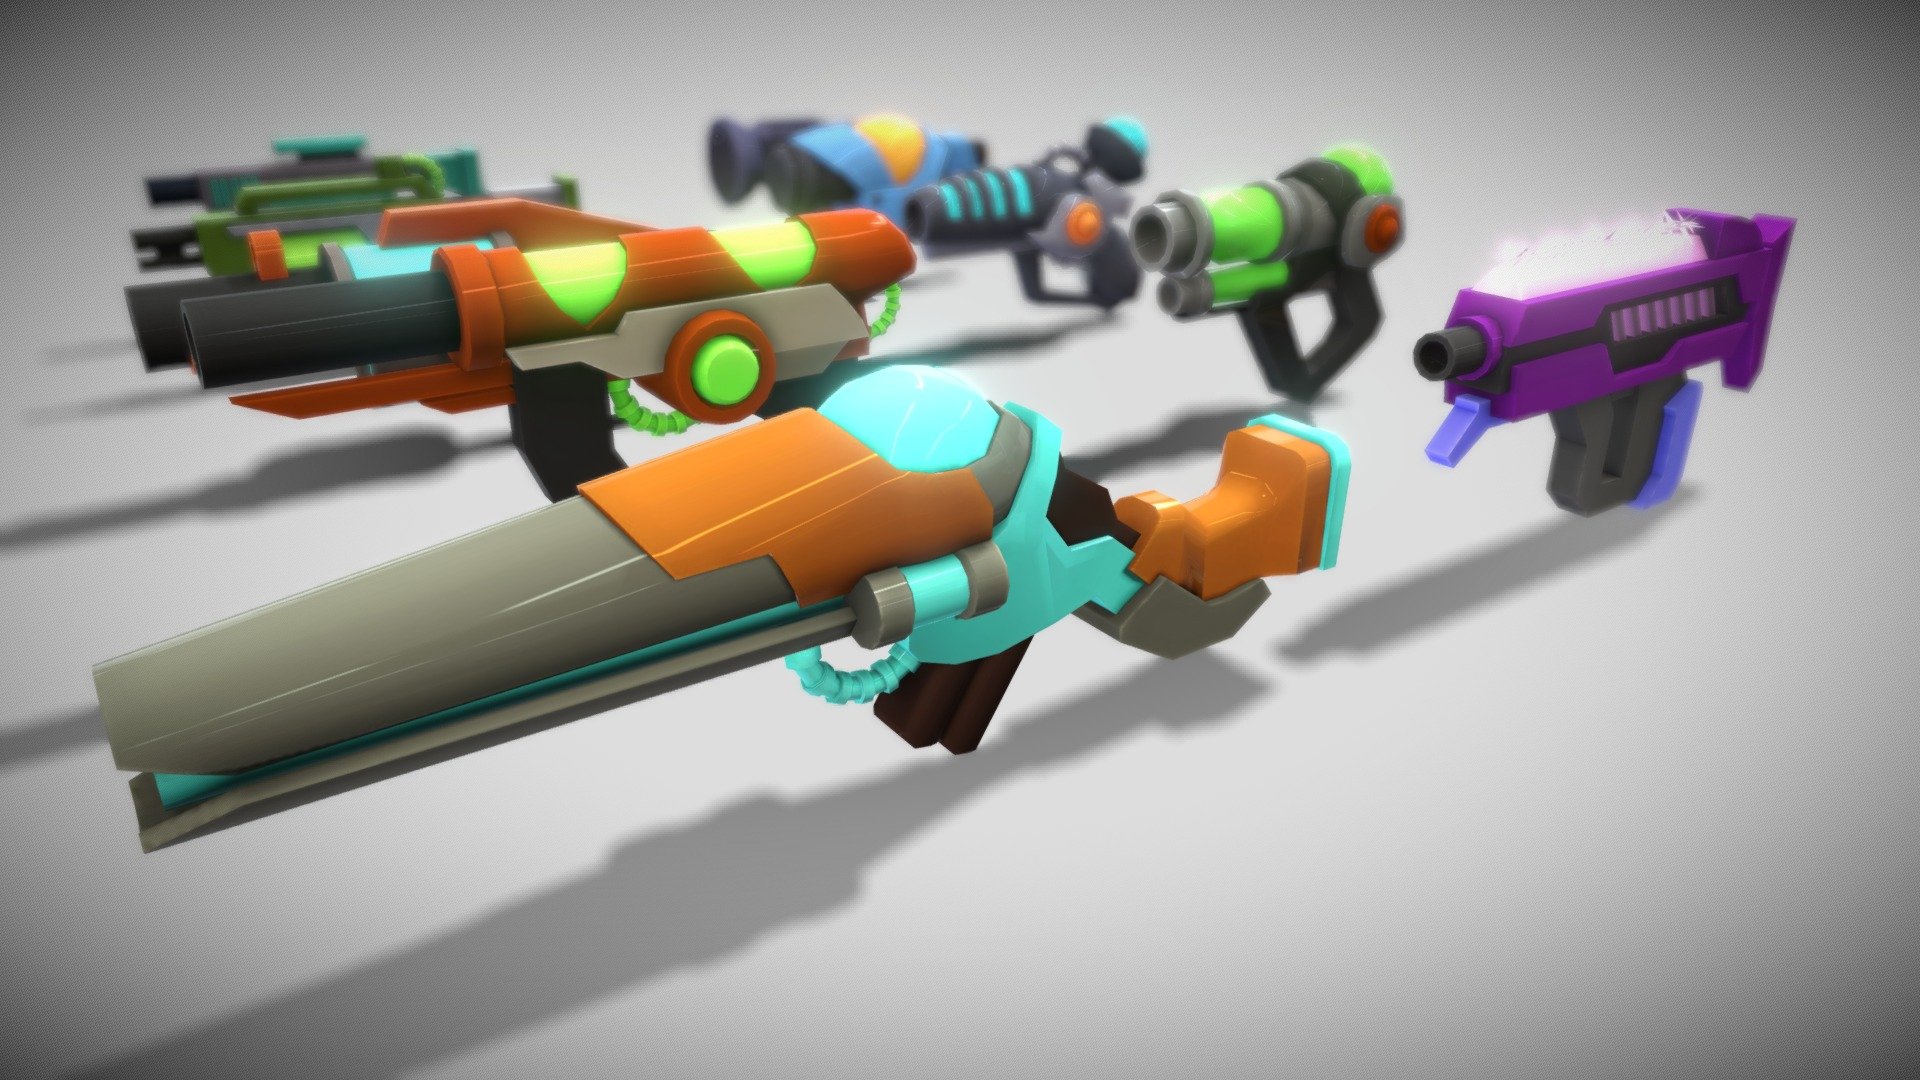 Set of 10 most popular low poly style guns with styles future.

Pack contains:
- Gun_01_H
- Gun_02_H
- Gun_03_H
- Gun_04_H
- Gun_05_H
- SGun_01_R
- Gun_02_R
- Gun_03_R
- Gun_04_R
-Gun_05_R
- Texture size 1024/1024 ,with  five level color 
All models use the same texture and material.
Don't forget to ranked the package if you download it. It's helping me to make greatest things 3d model